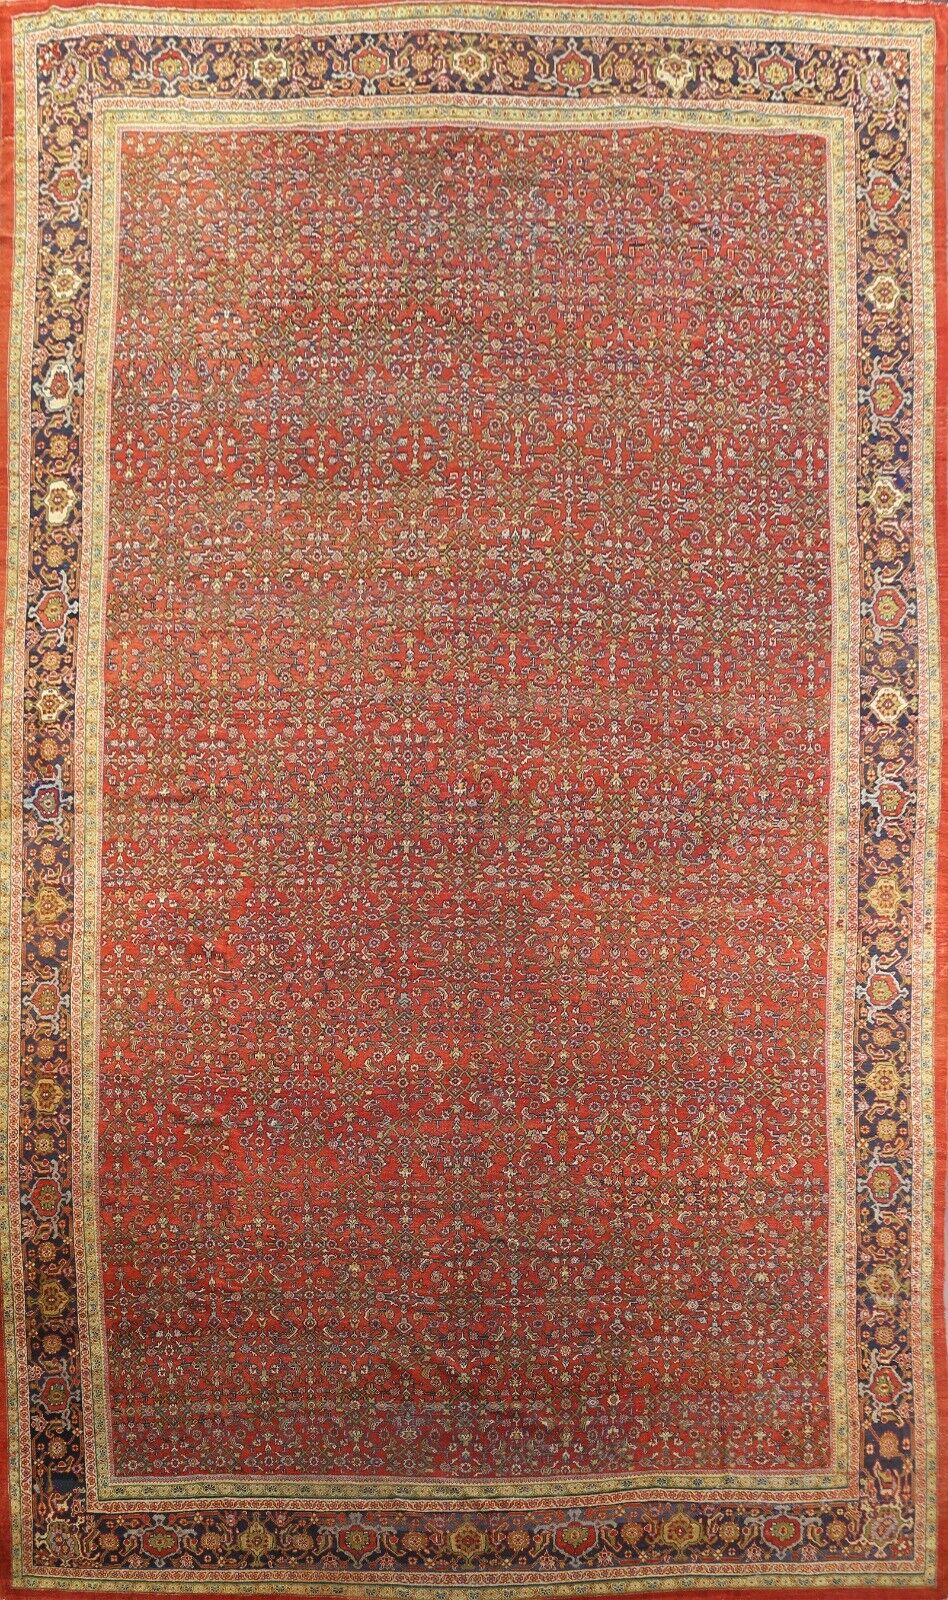 Pre-1900 Antique Vegetable Dye Sultanabad Hand-knotted Oversize Area Rug 15\'x22\'